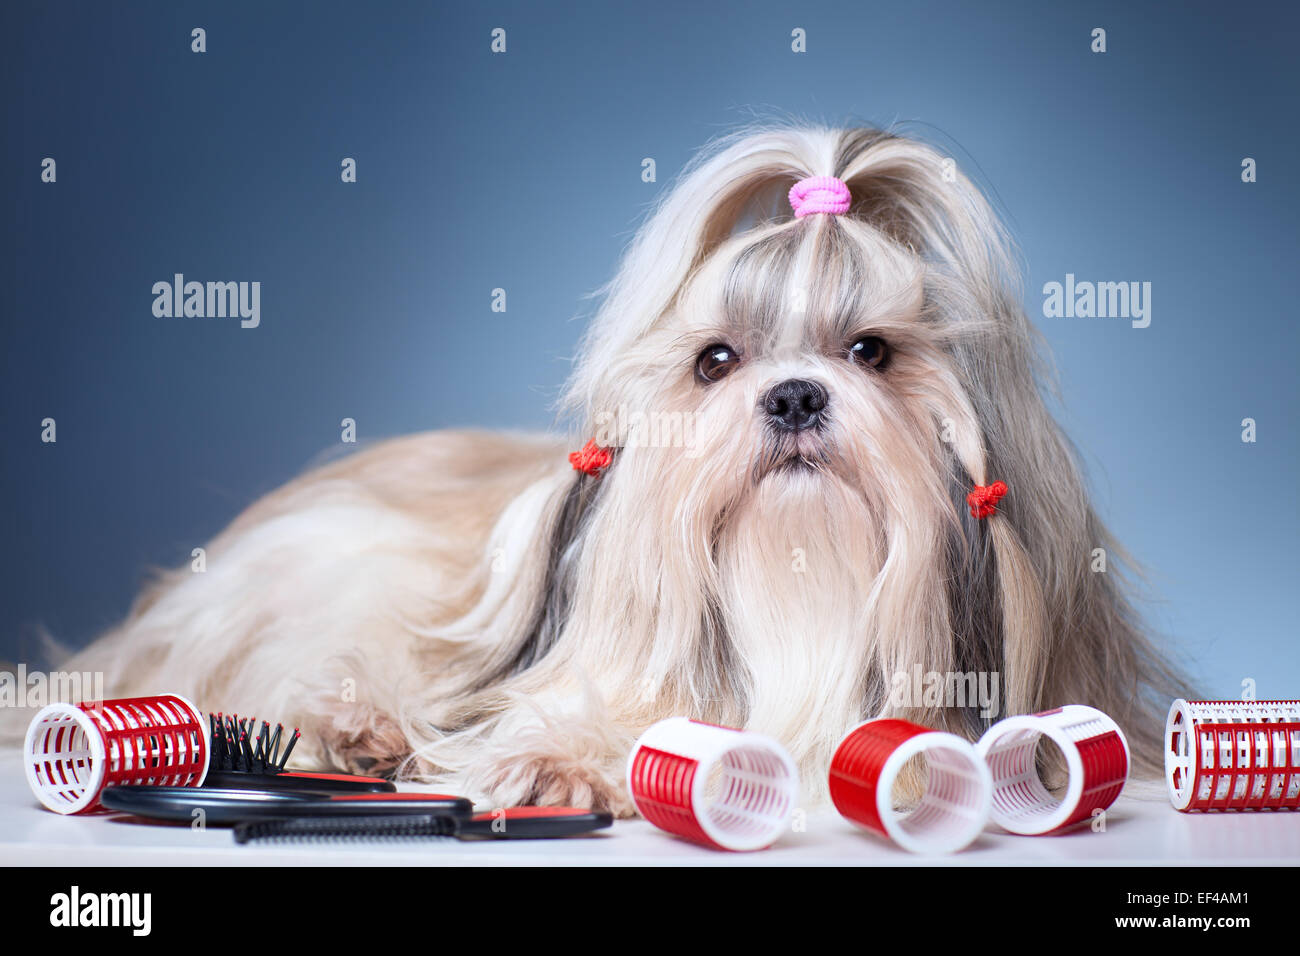 Shih tzu dog with red curlers grooming on blue background. Stock Photo